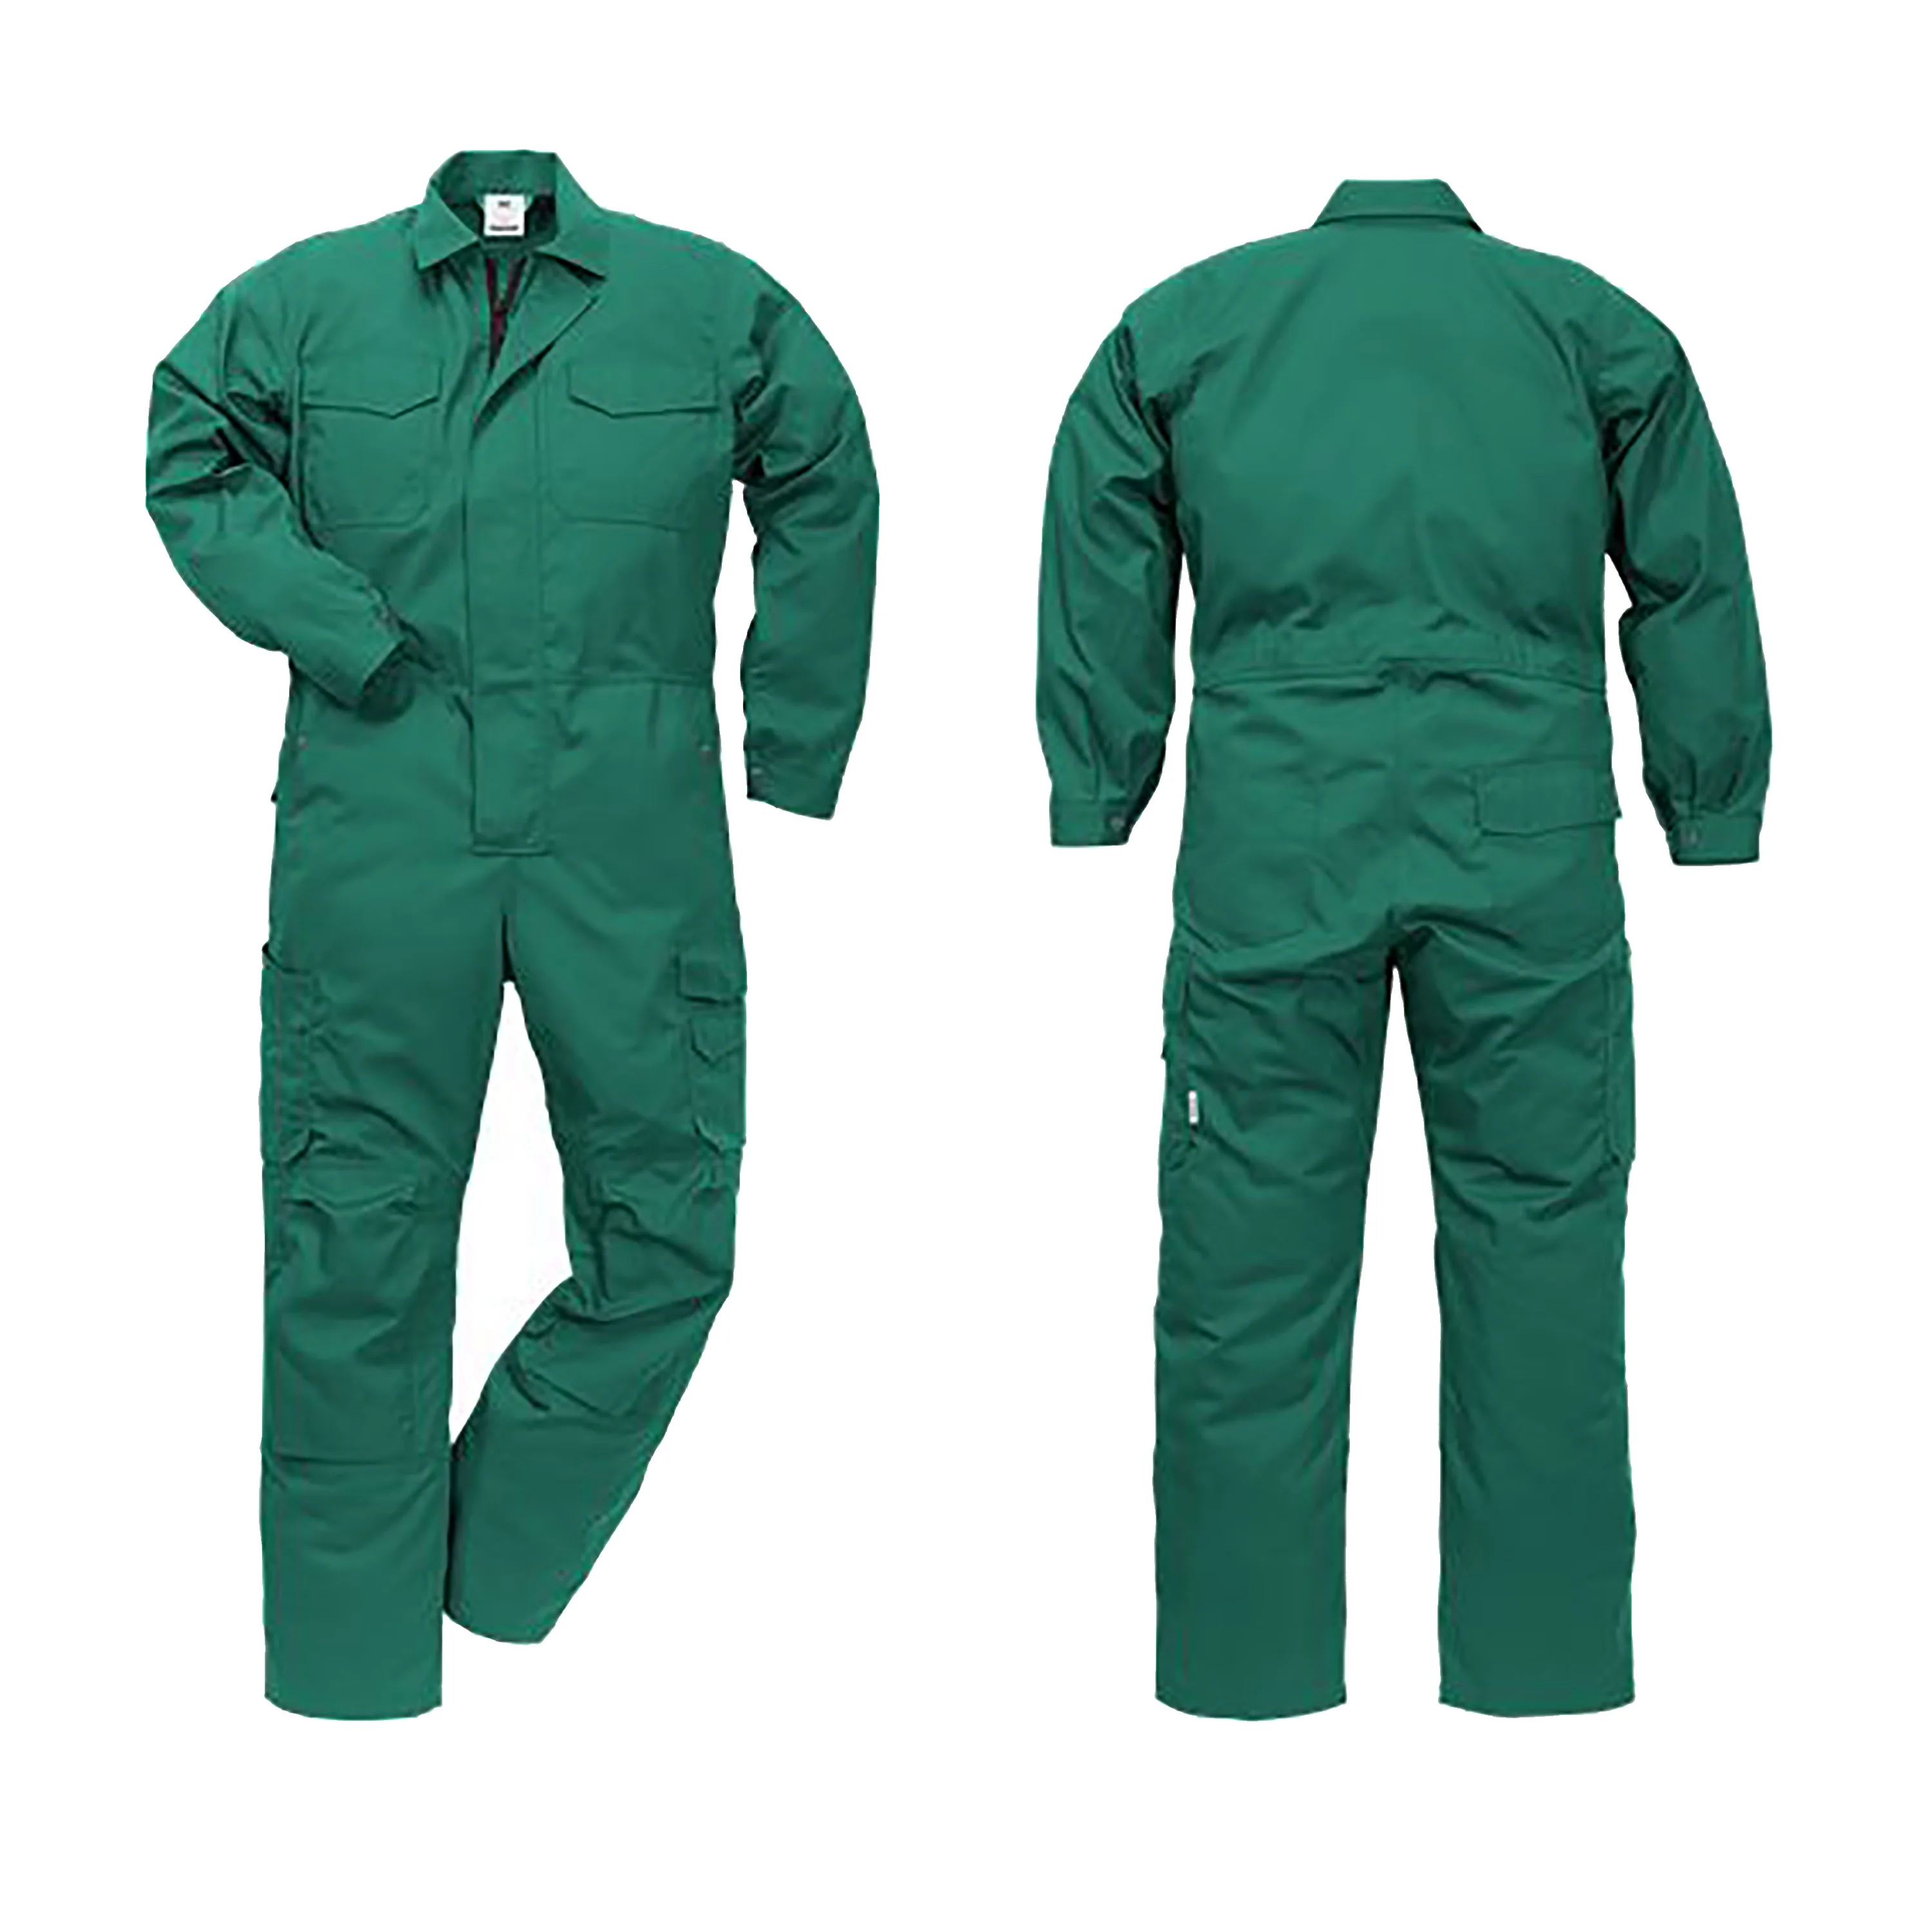 Boiler Suit 100% Cotton Fire Flame Retardant Welder Safety Coverall Work Wear 